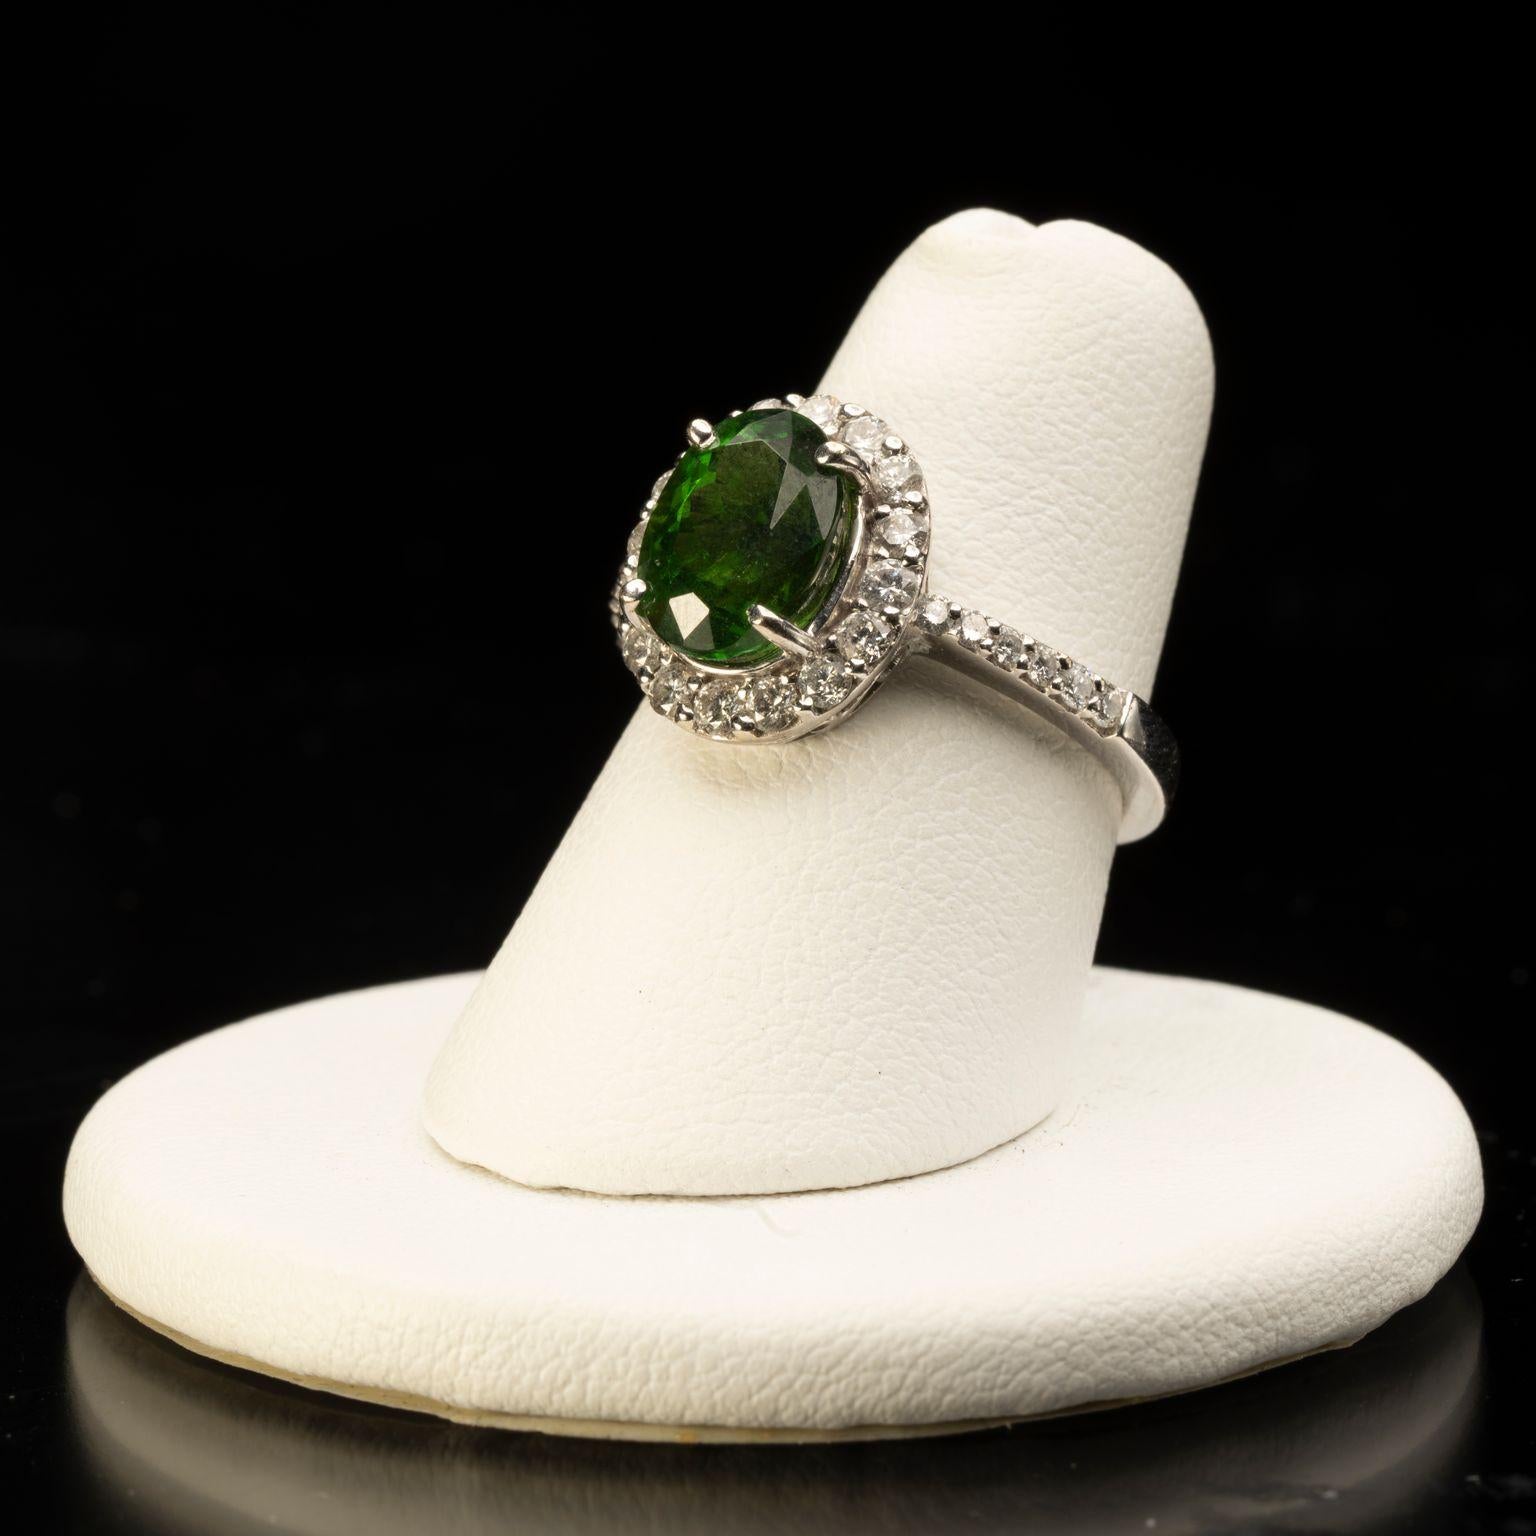 This sparkling green-drenched chrome tourmaline is set off brilliantly by a generous display of white diamonds in an intricately tooled 14 karat white gold setting on a 14 karat white gold band for an elegant ring certain to stun.

Size: